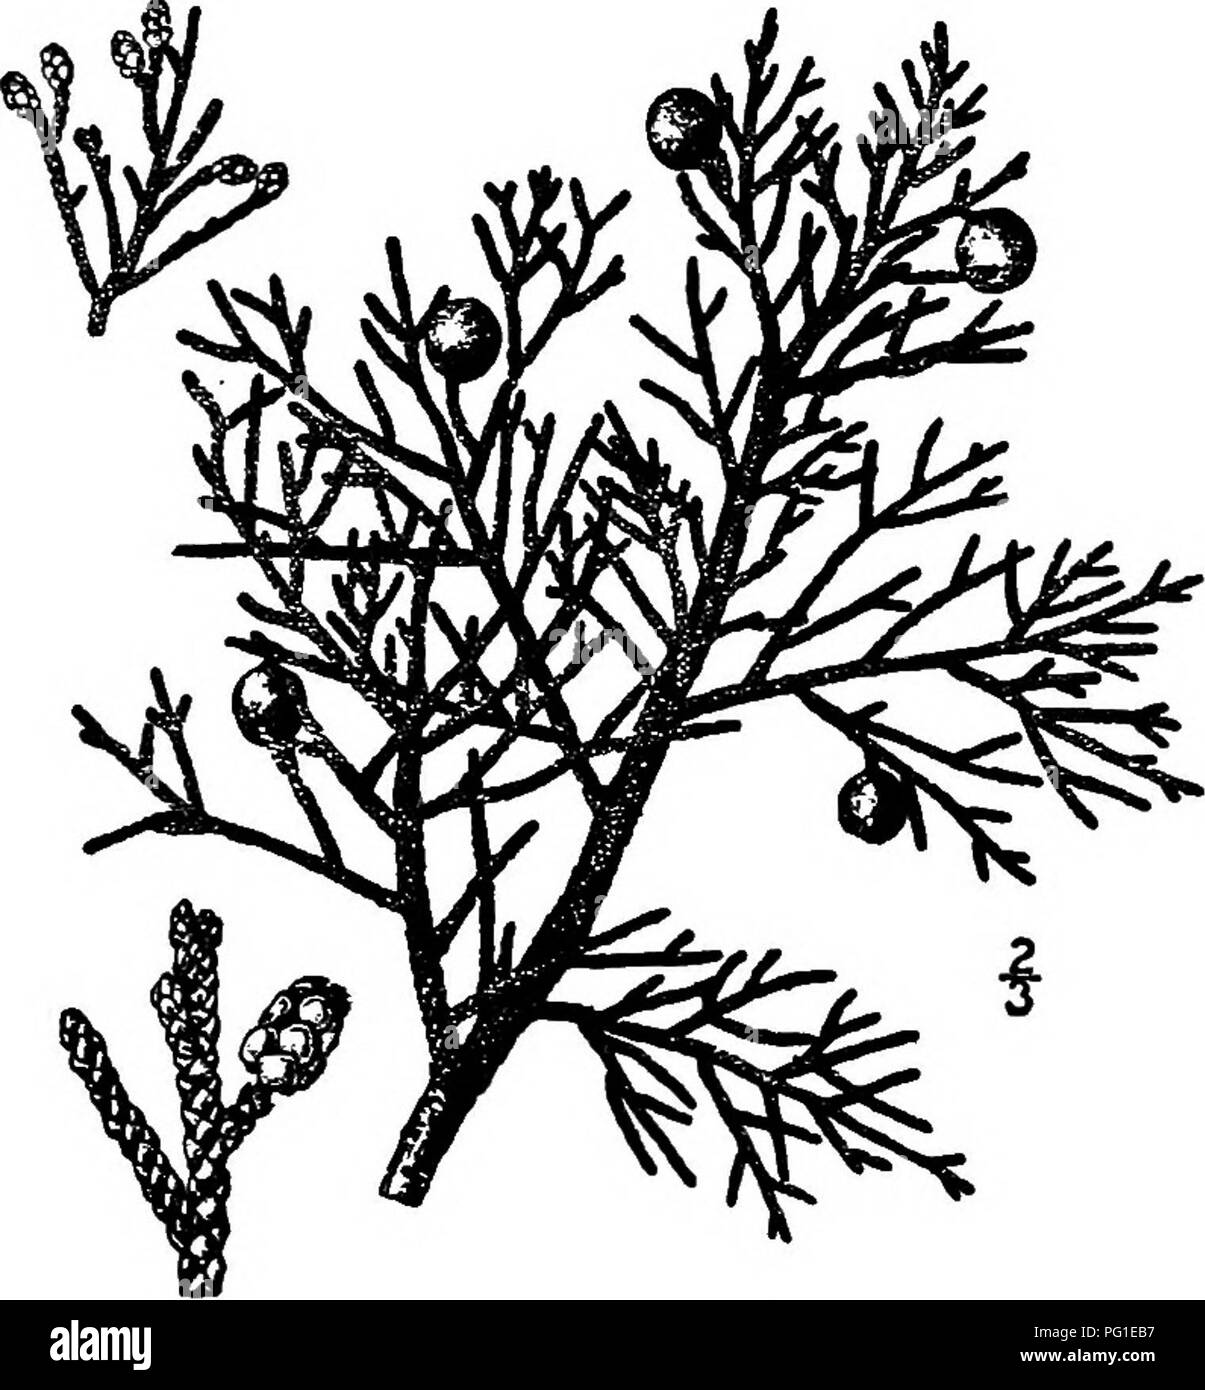 . North American trees : being descriptions and illustrations of the trees growing independently of cultivation in North America, north of Mexico and the West Indies . Trees. 114 The Junipers 7. WESTERN JUNIPER —Jmiipenis ocddentalis Hooker Juniperus excelsa Pursh, not Bieberstein. Juniperus andina Nuttall A tree or shrub, often prostrate, of the mountains of Washington and Idaho, south to the San Bernardino Mountains of California, mostly at altitudes of from 1800 to 3000 meters, reaching a maximum height of about 18 meters with a trunk diameter of 9 dm.; low forms sometimes have trunks of mu Stock Photo